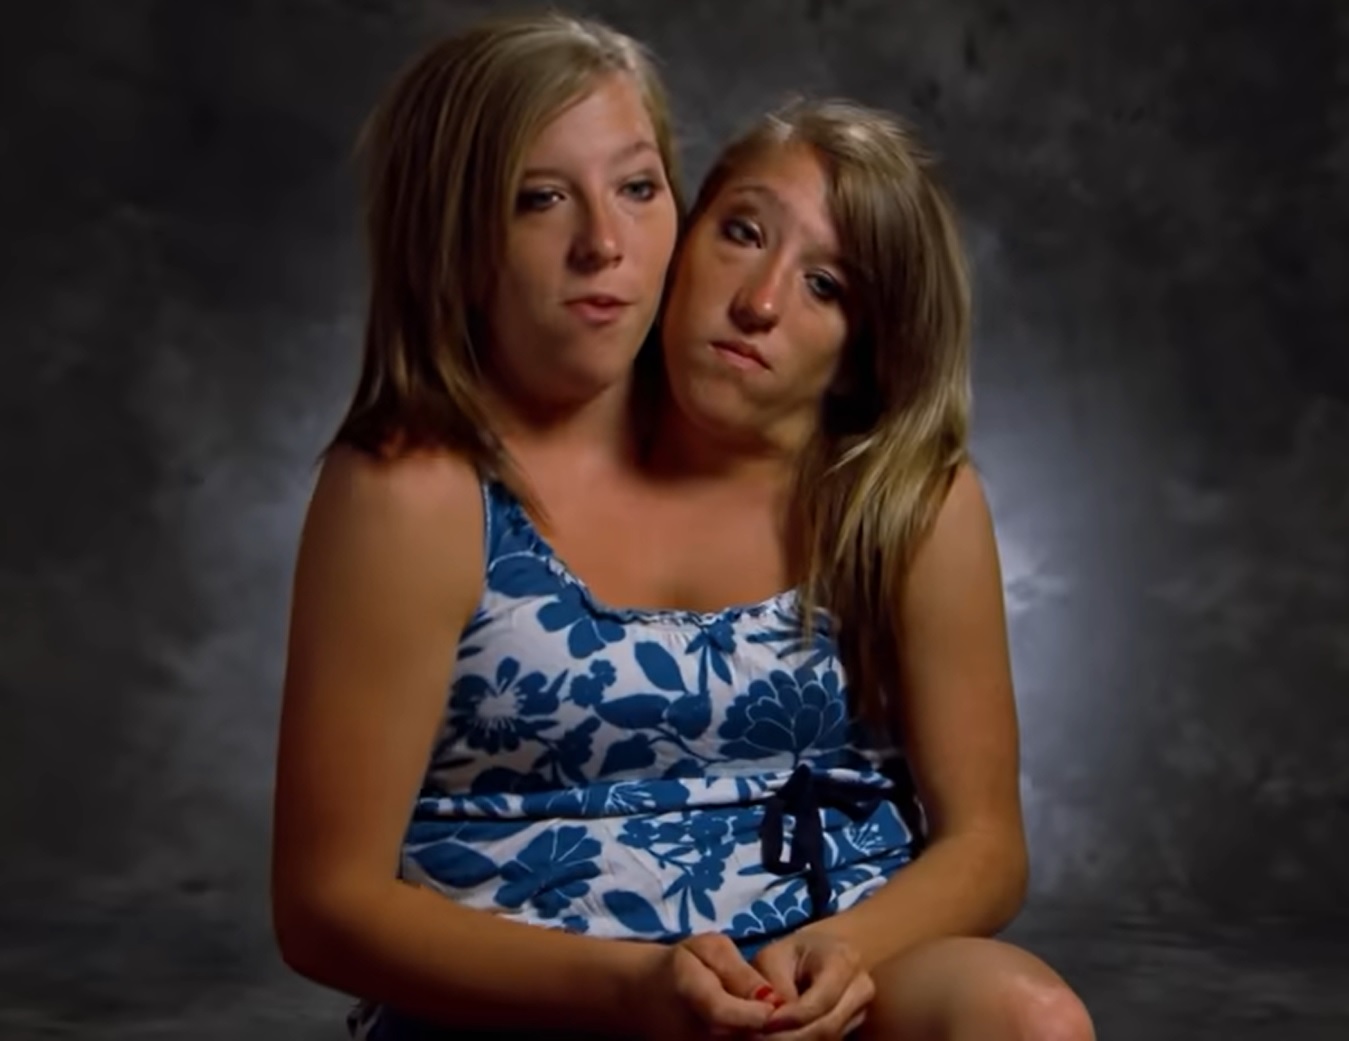 Watch: Twins Abigail and Brittany Hensel are 'One Body, Two Souls